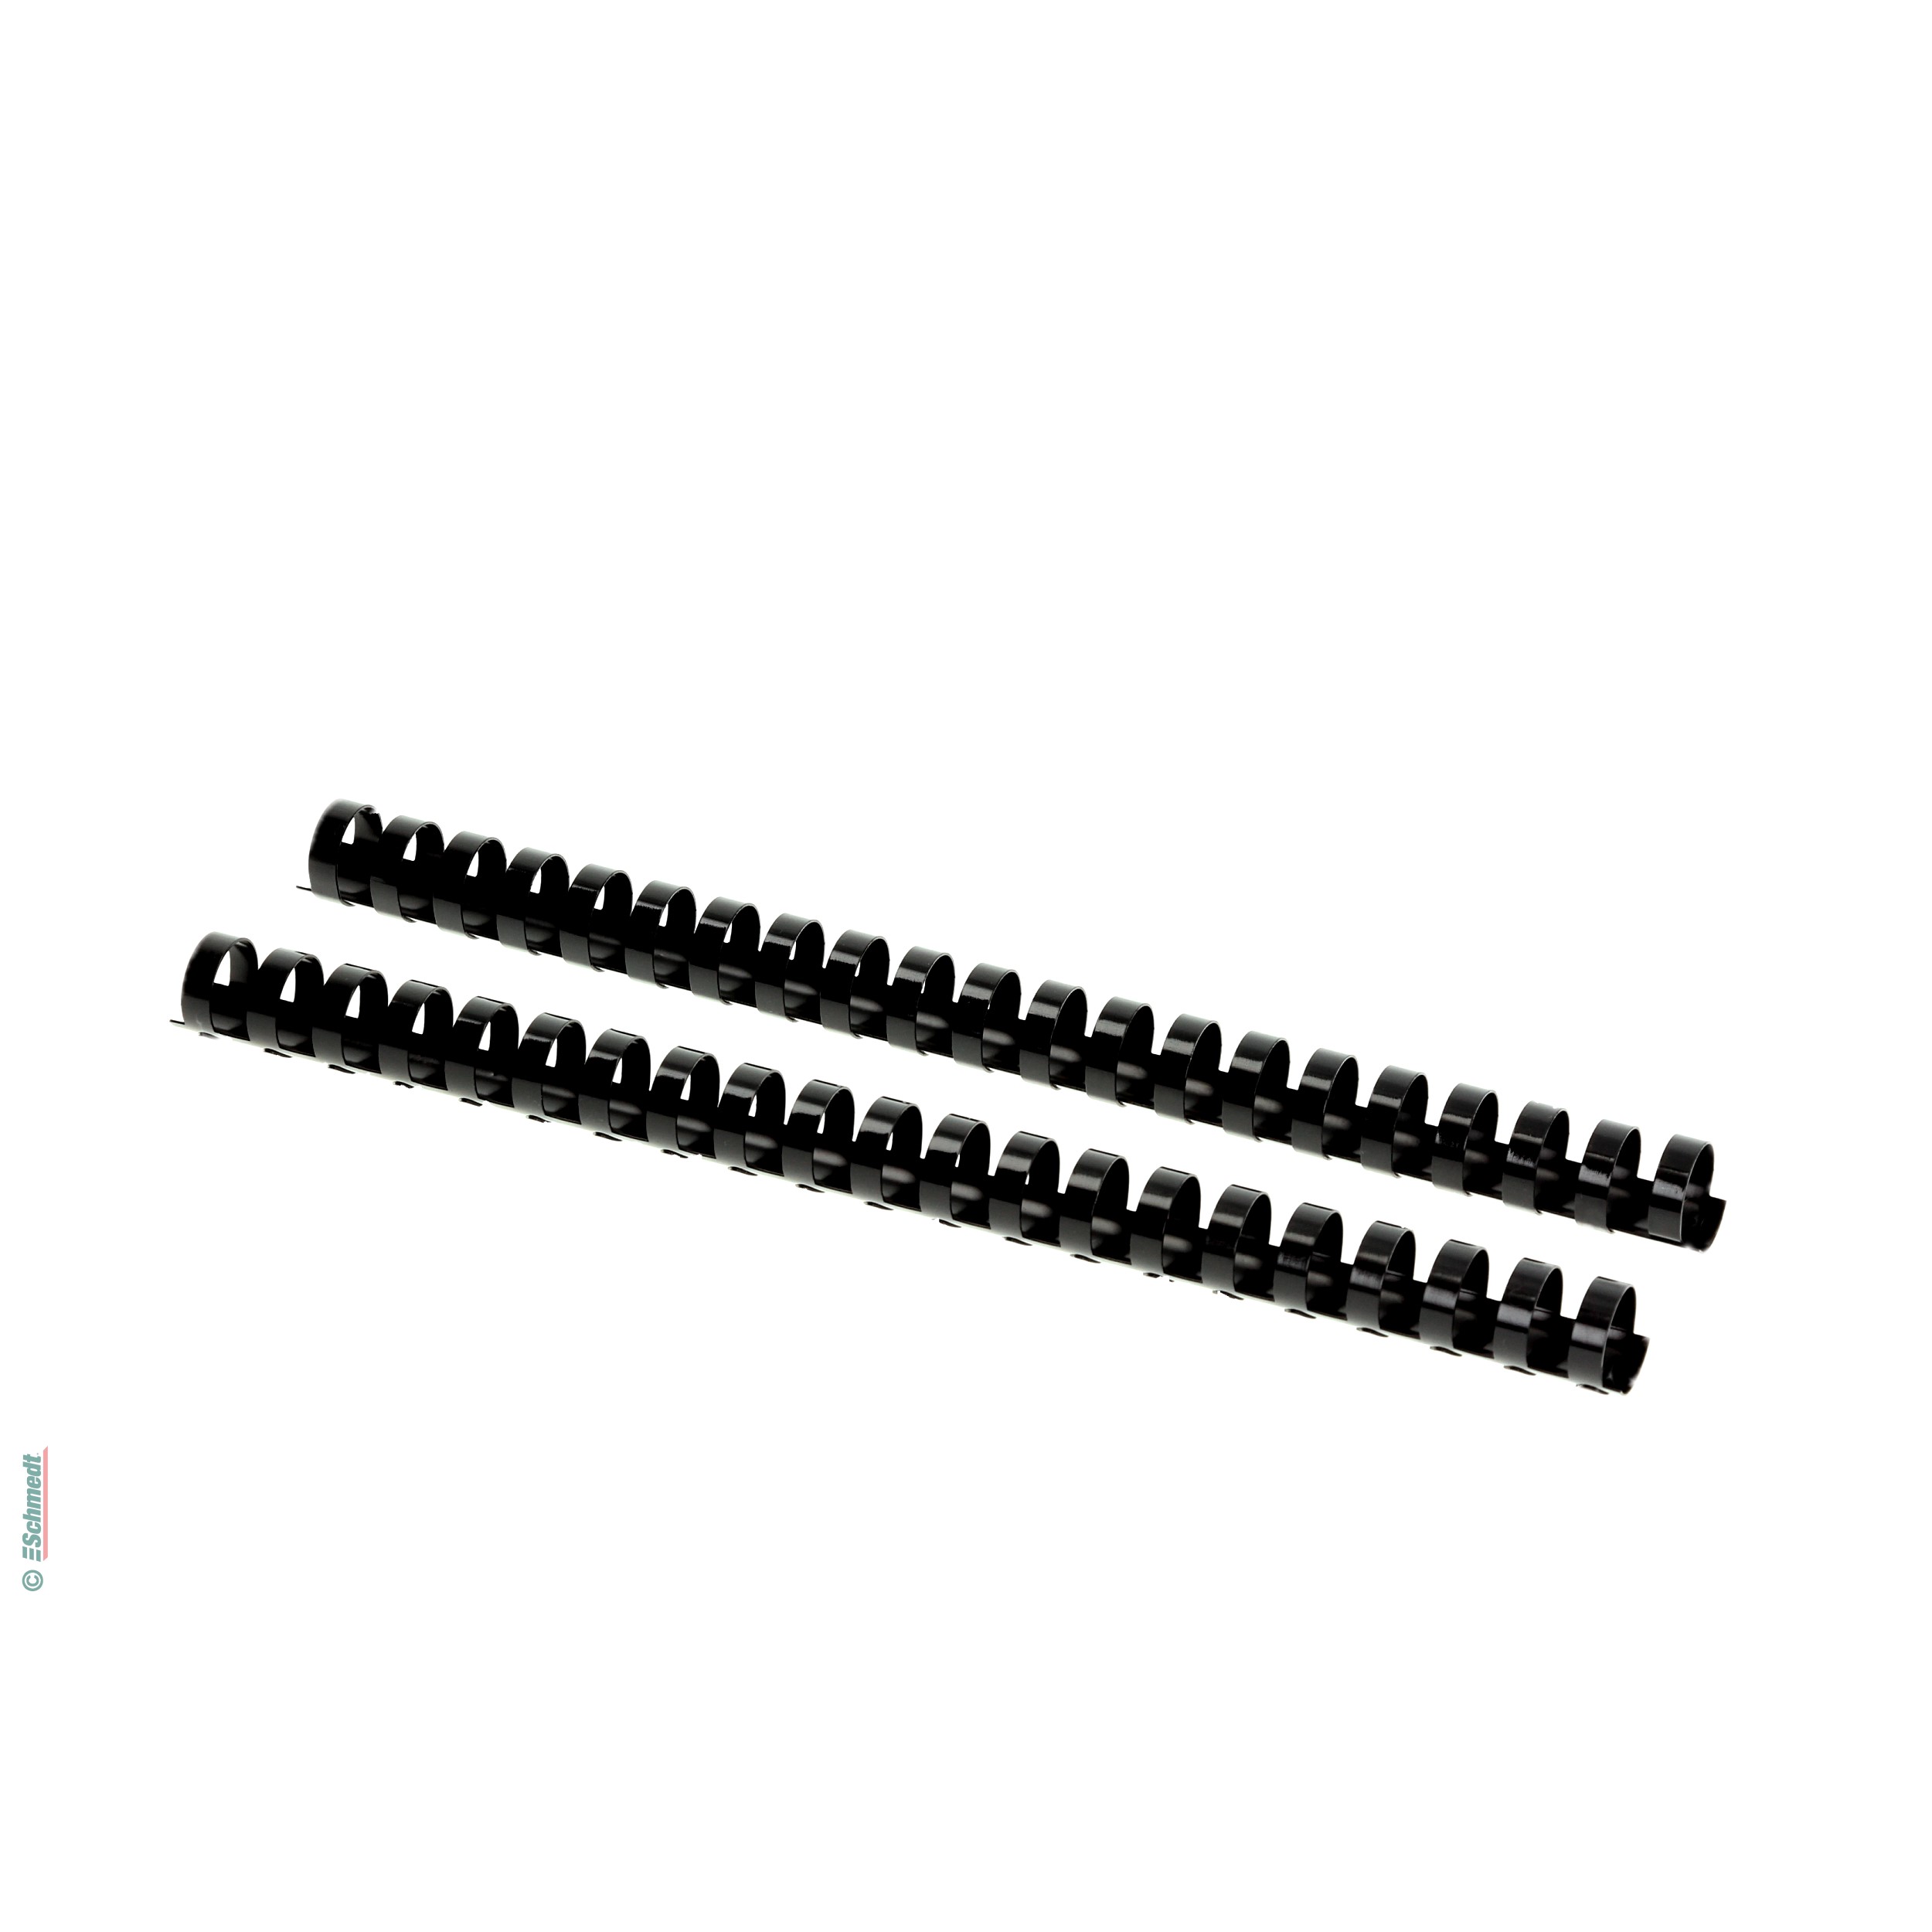 Plastic binding combs - round - Diameter (in mm) 16 - Colour black - to be processed in plastic-comb binding machines... - image-2